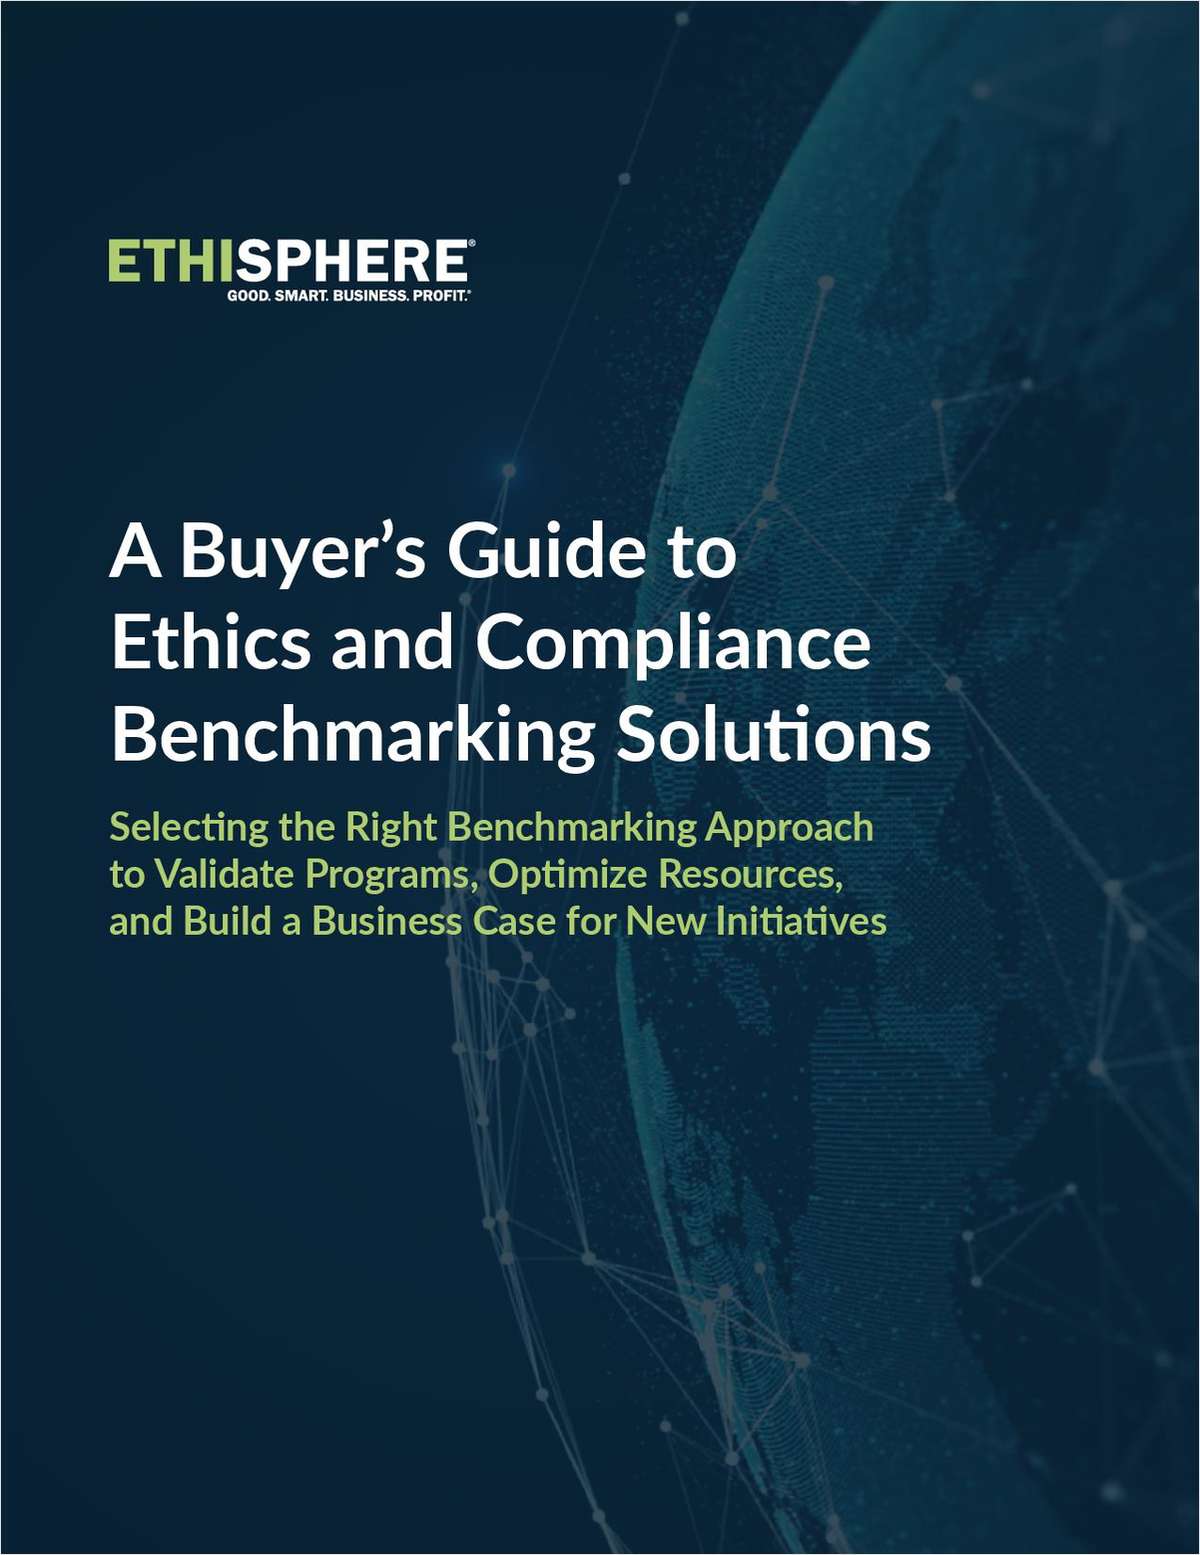 A Buyer's Guide to Ethics and Compliance Benchmarking Solutions